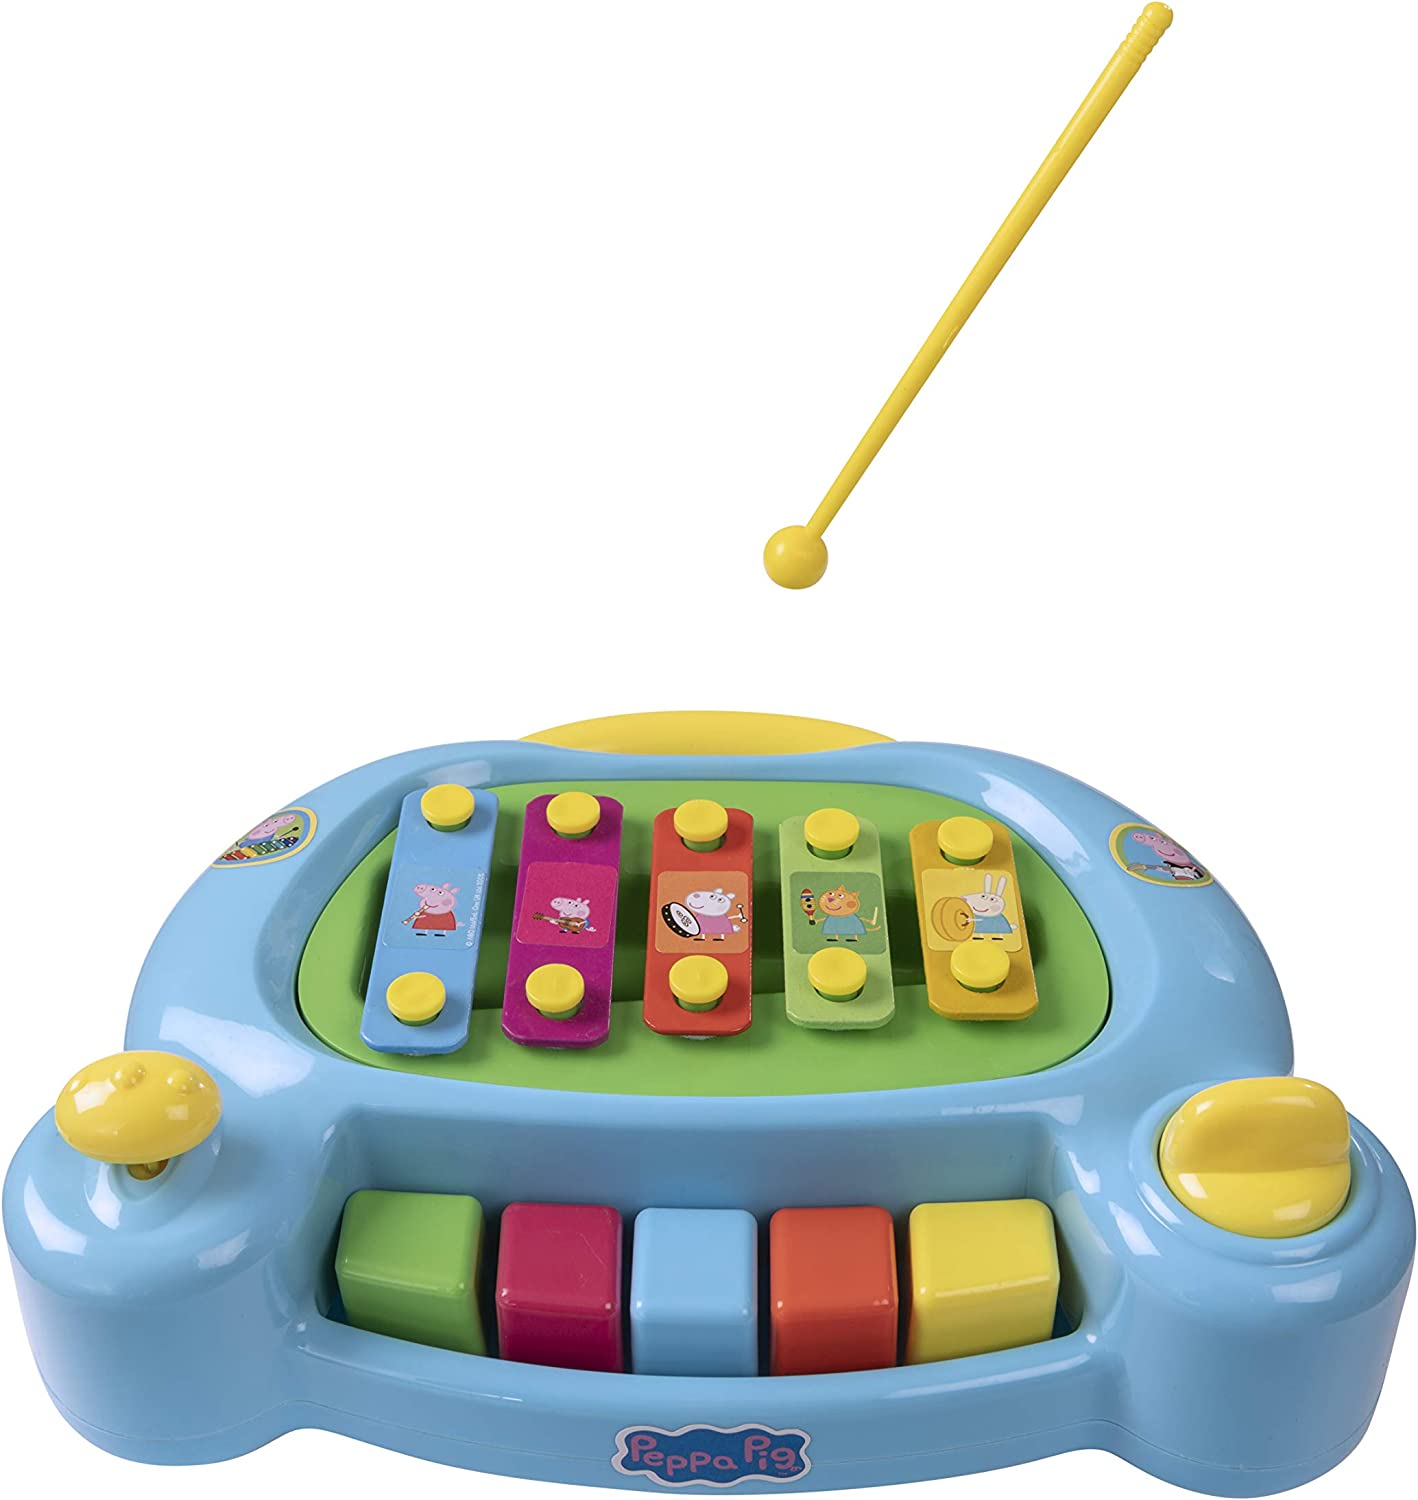 Peppa Pig My First Pink Piano & Xylophone Music Toy - Little Kids Business